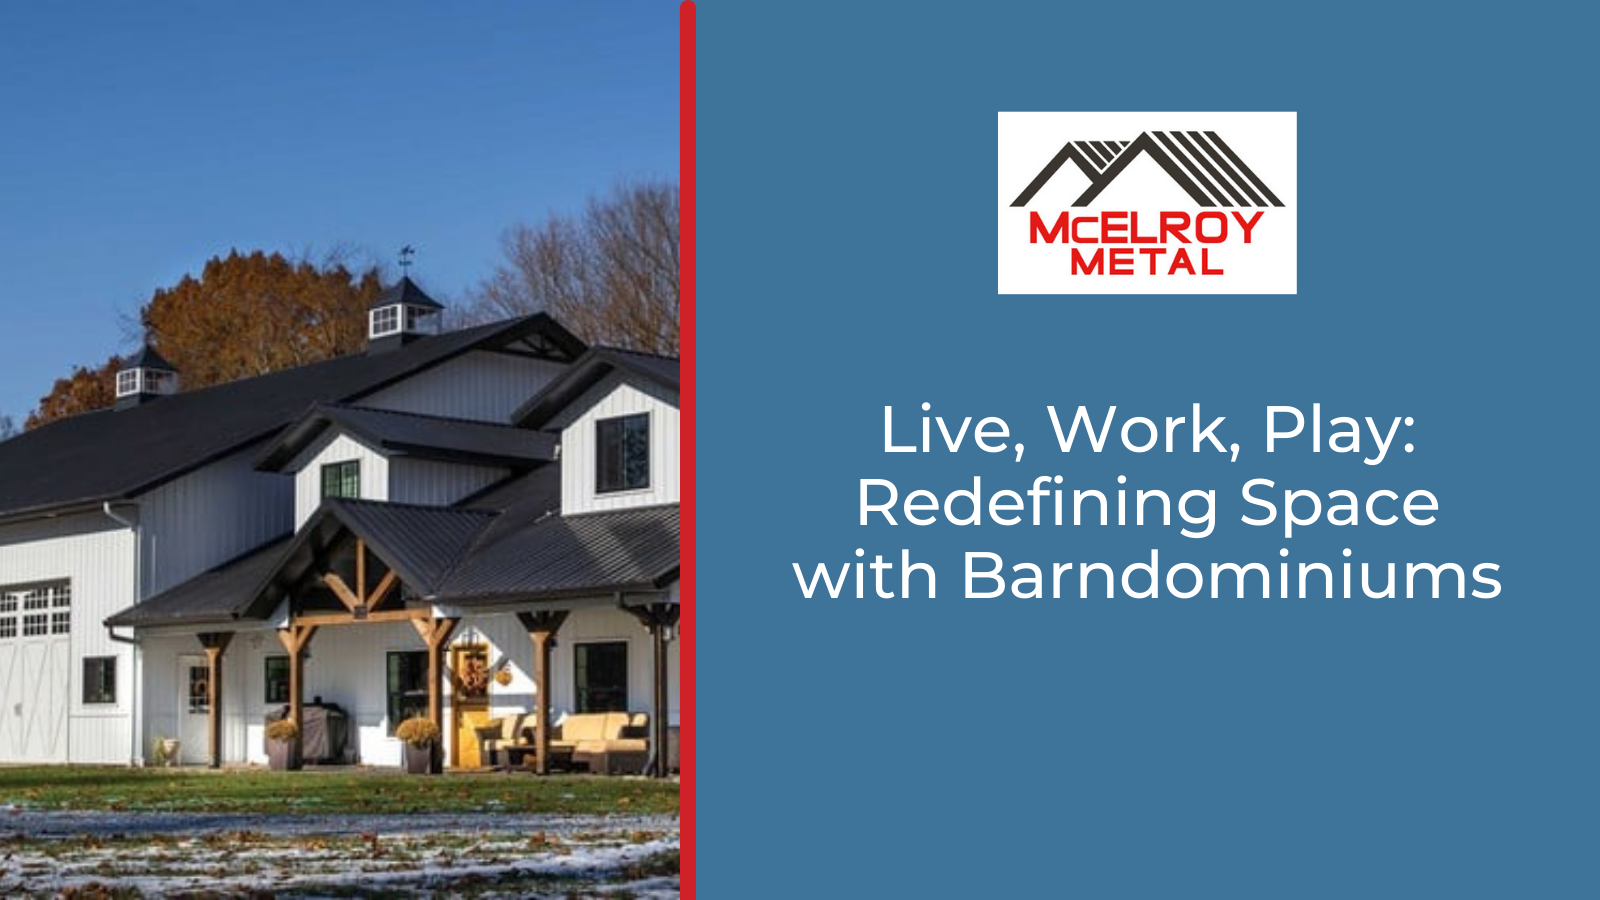 Live, Work, Play: Redefining Space with Barndominiums